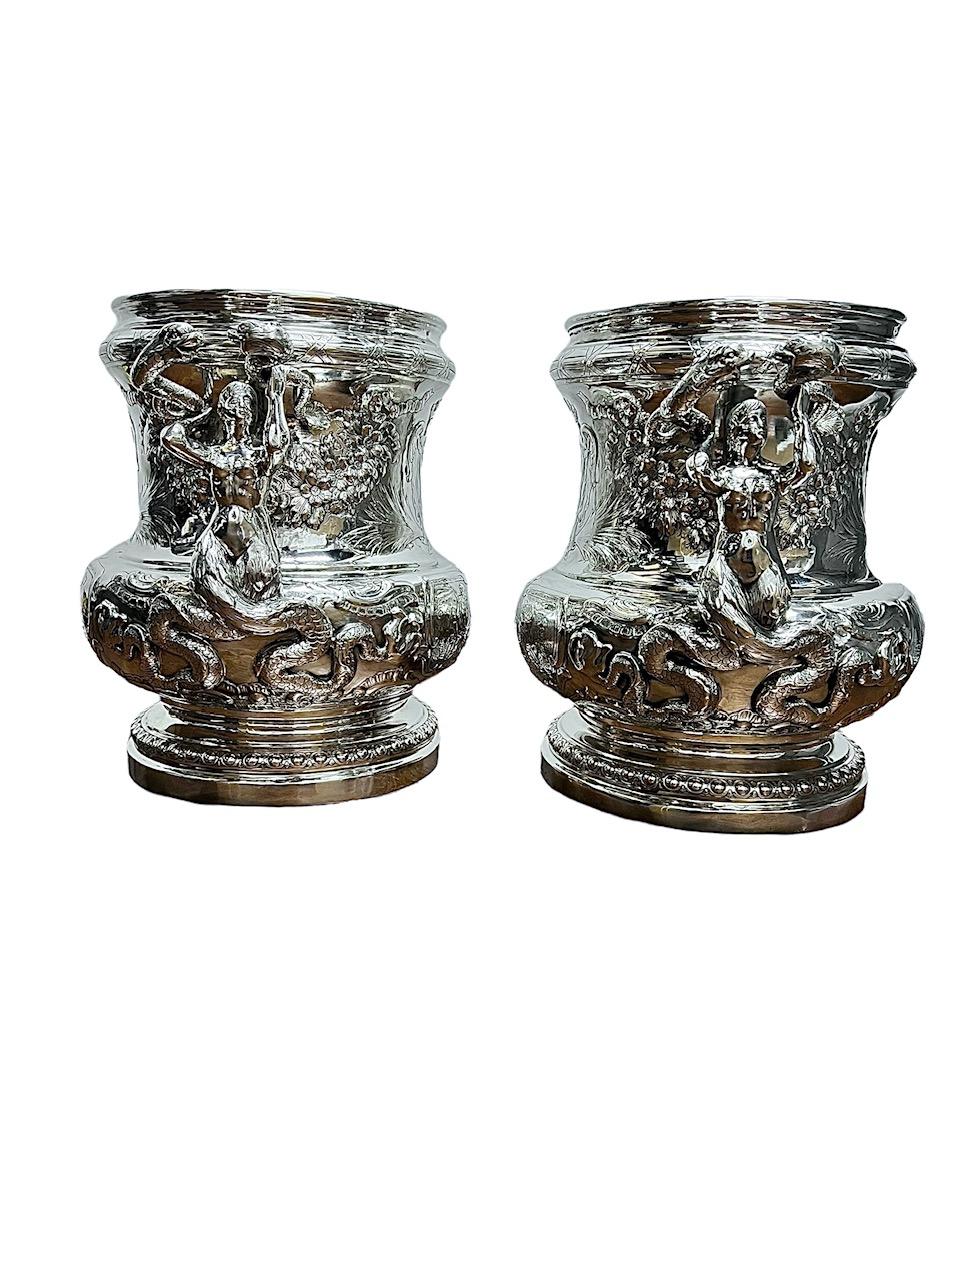 1890 Pair of German Solid Sterling Silver Coolers (Buckets), Sea Creatures For Sale 12